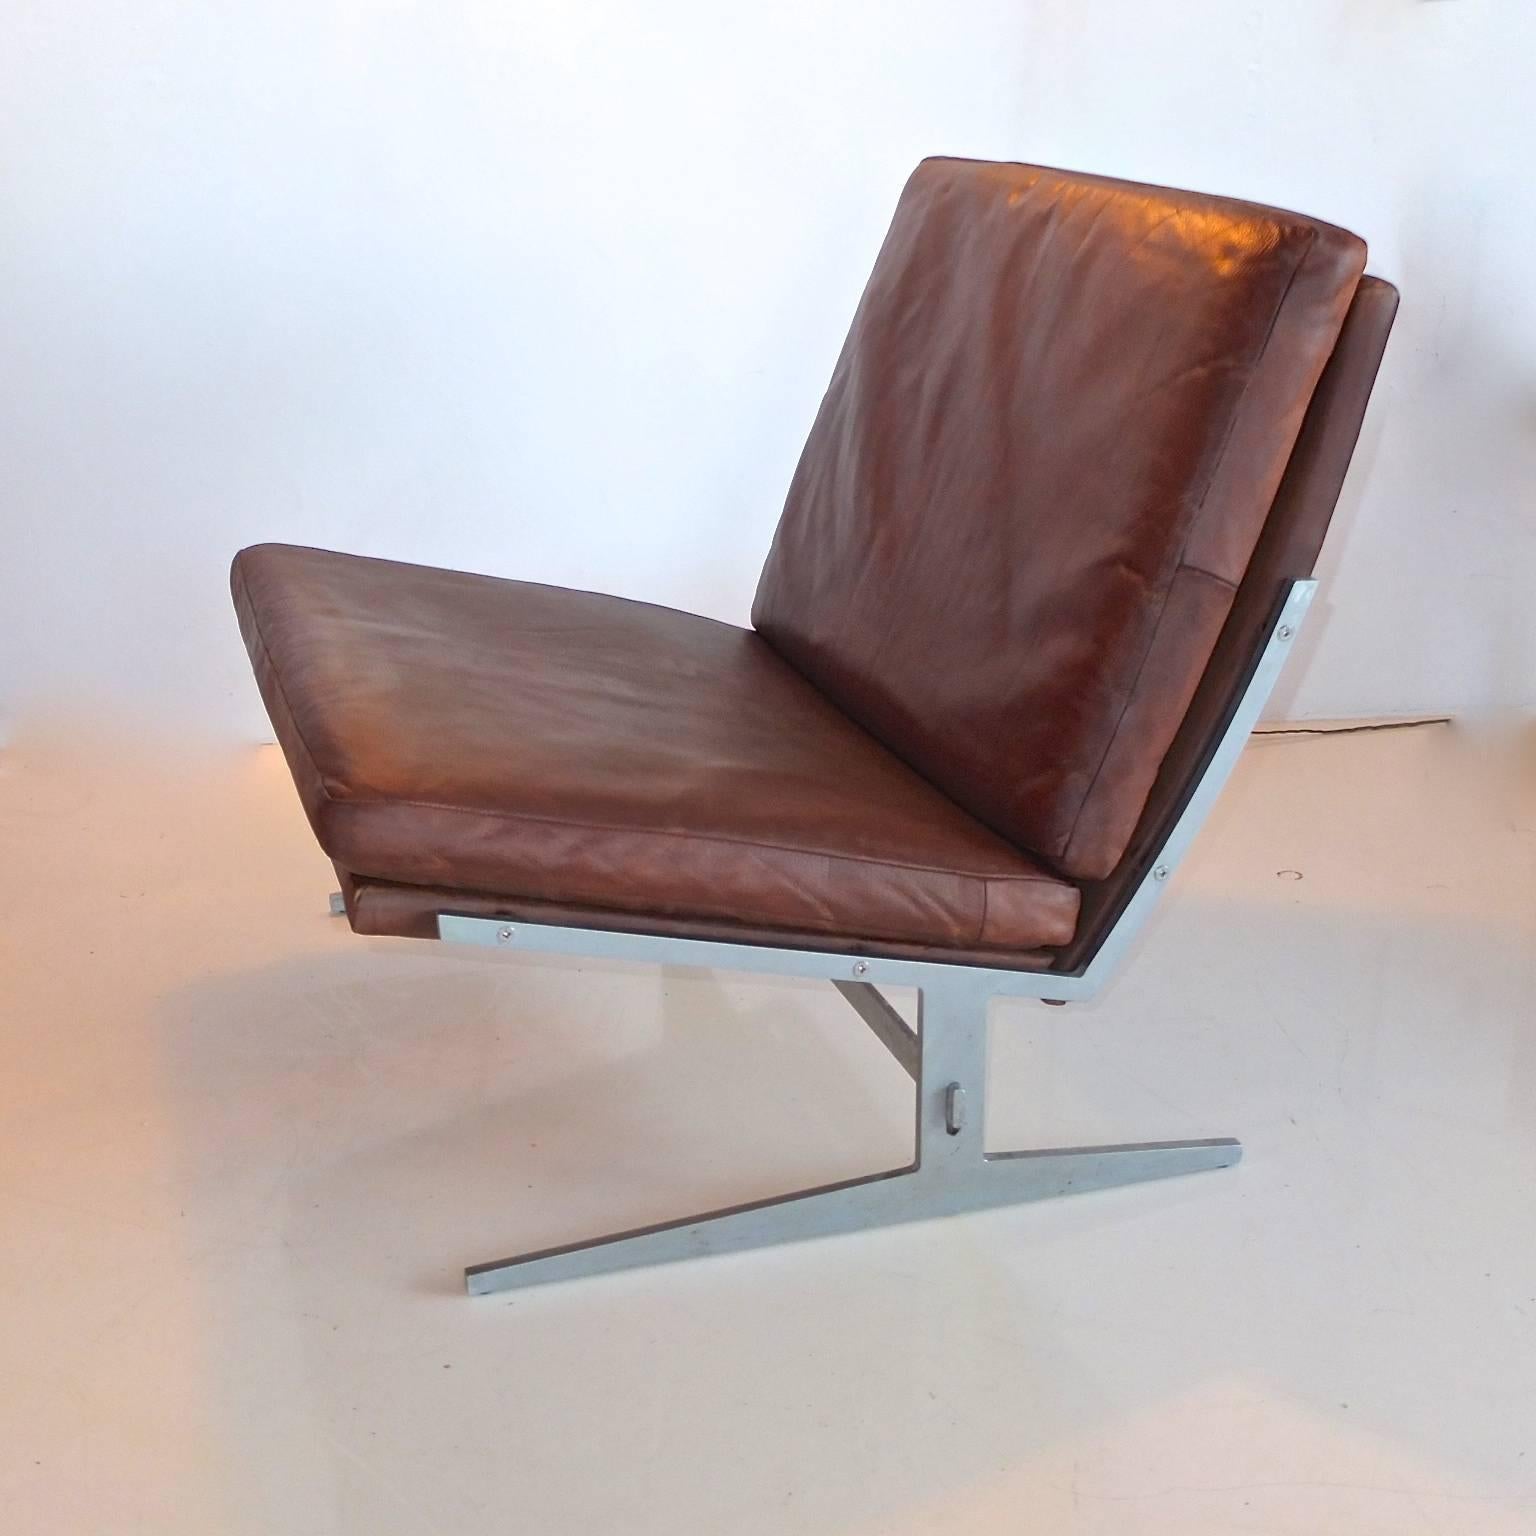 Mid-20th Century Pair of BO-561 Lounge Chairs Designed by Fabricius & Kastholm